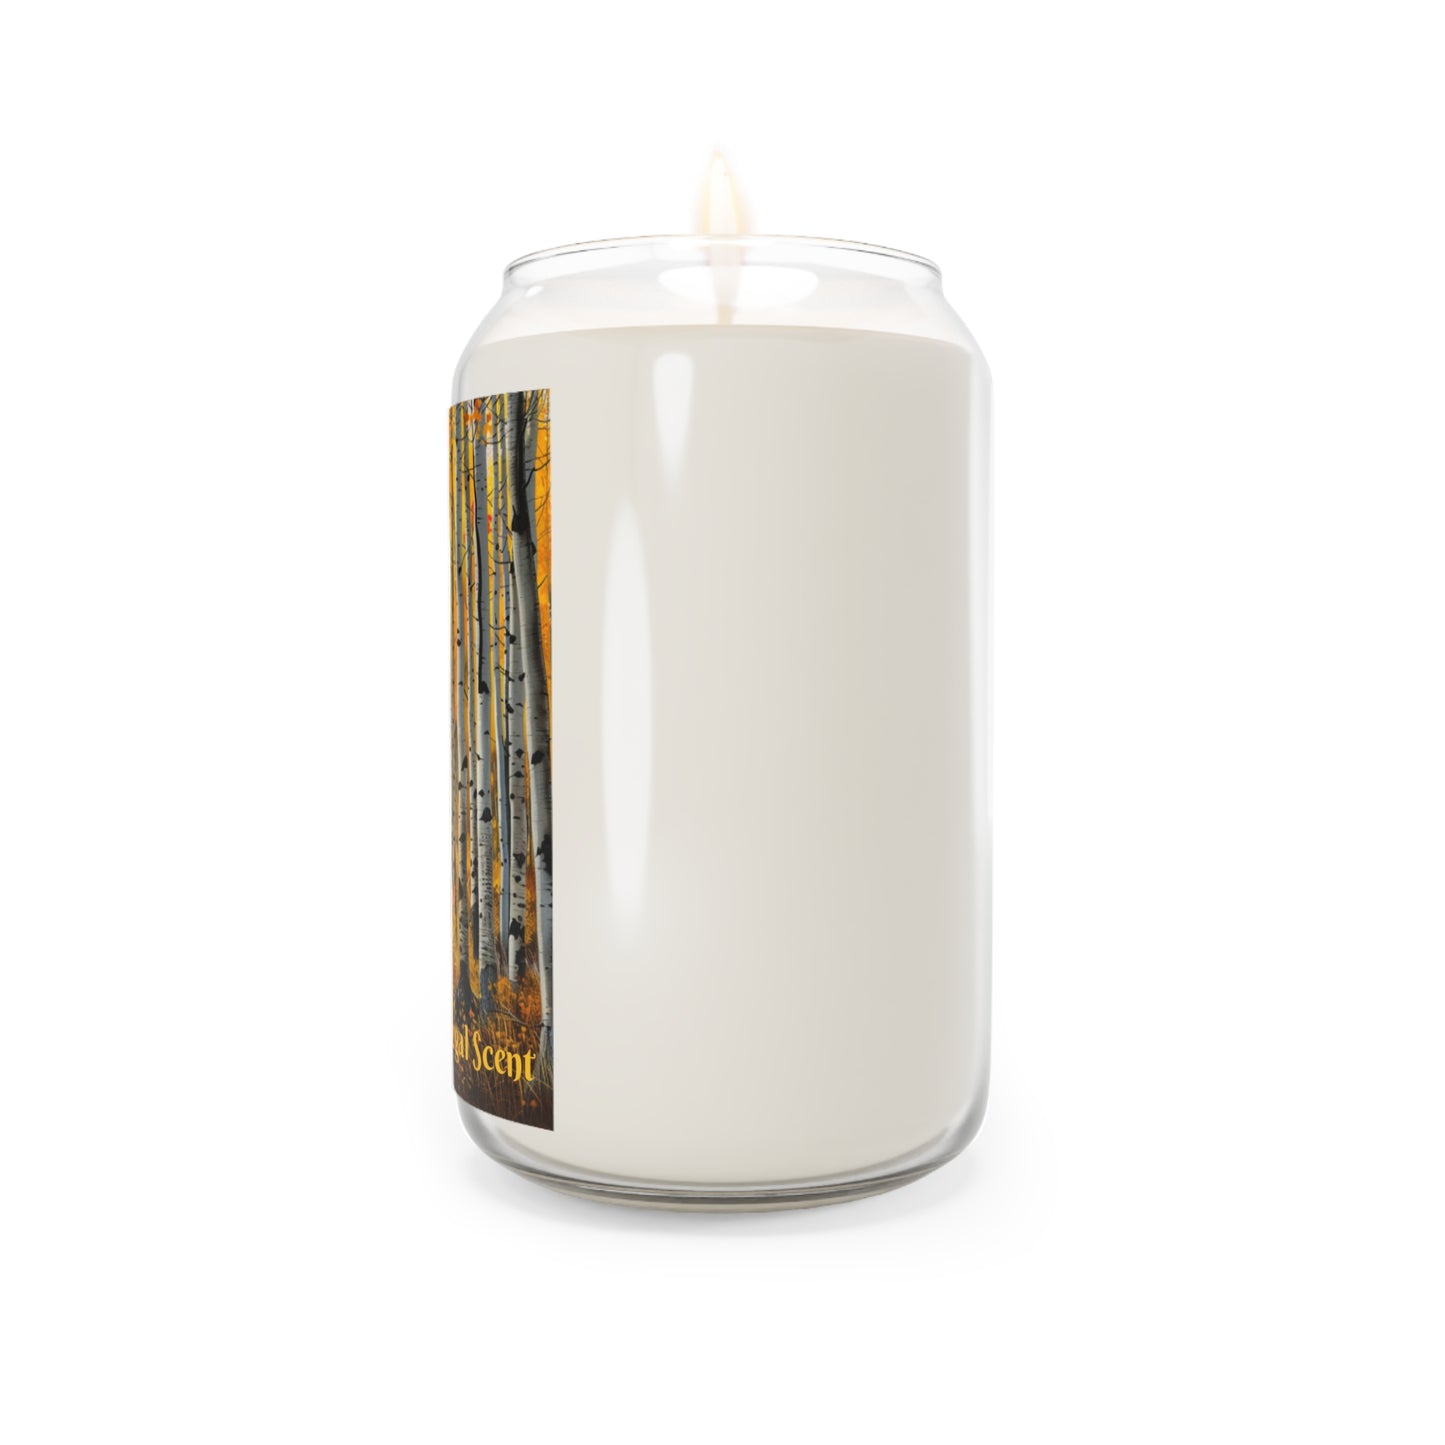 Forest Comfort Spice Scented Candle, 13.75oz